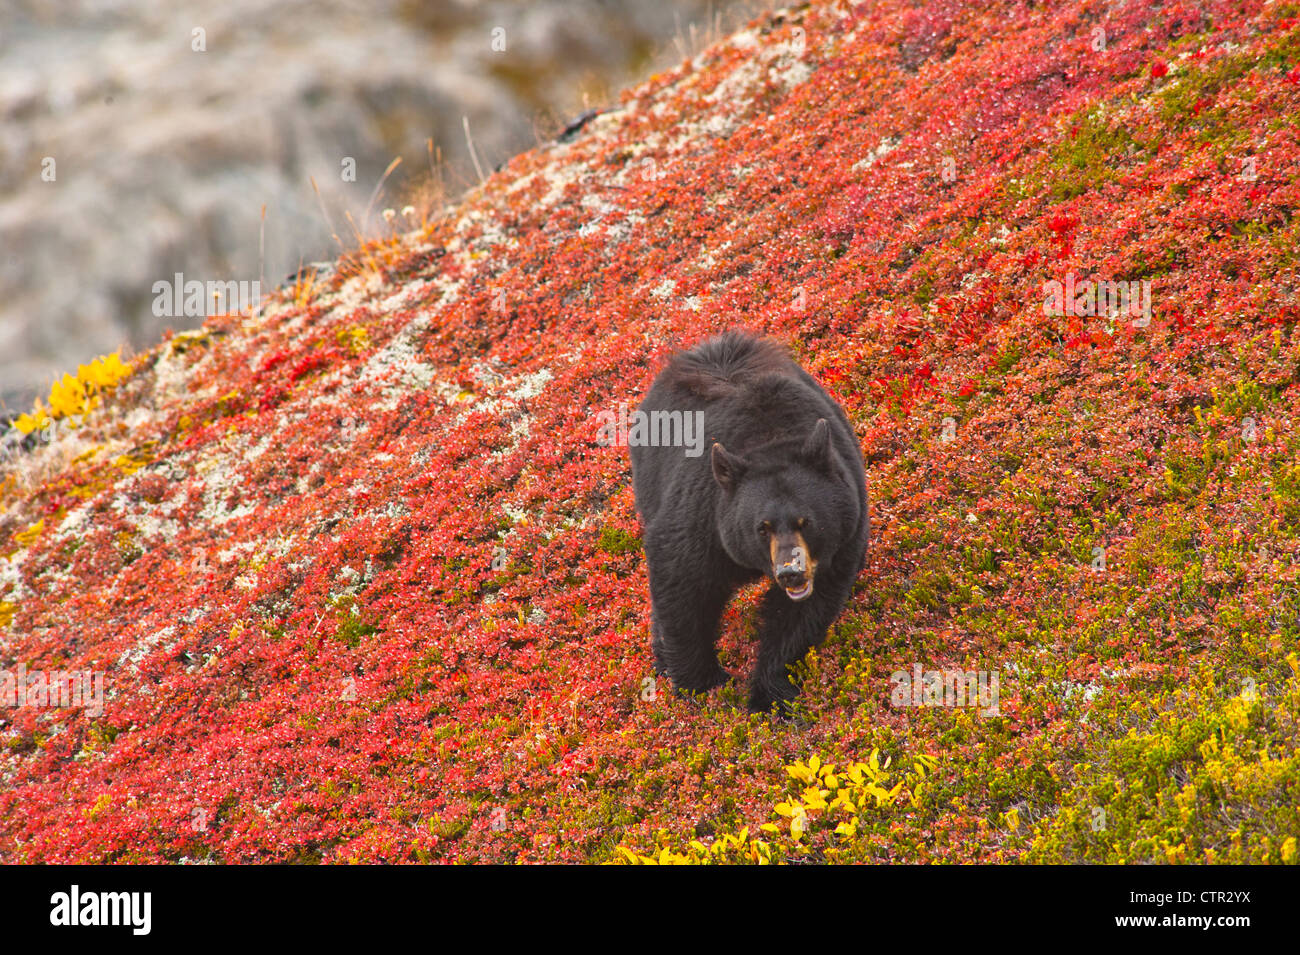 Black bear foraging berries on bright red patch tundra near Harding Icefield Trail Exit Glacier Kenai Fjords National Park Stock Photo